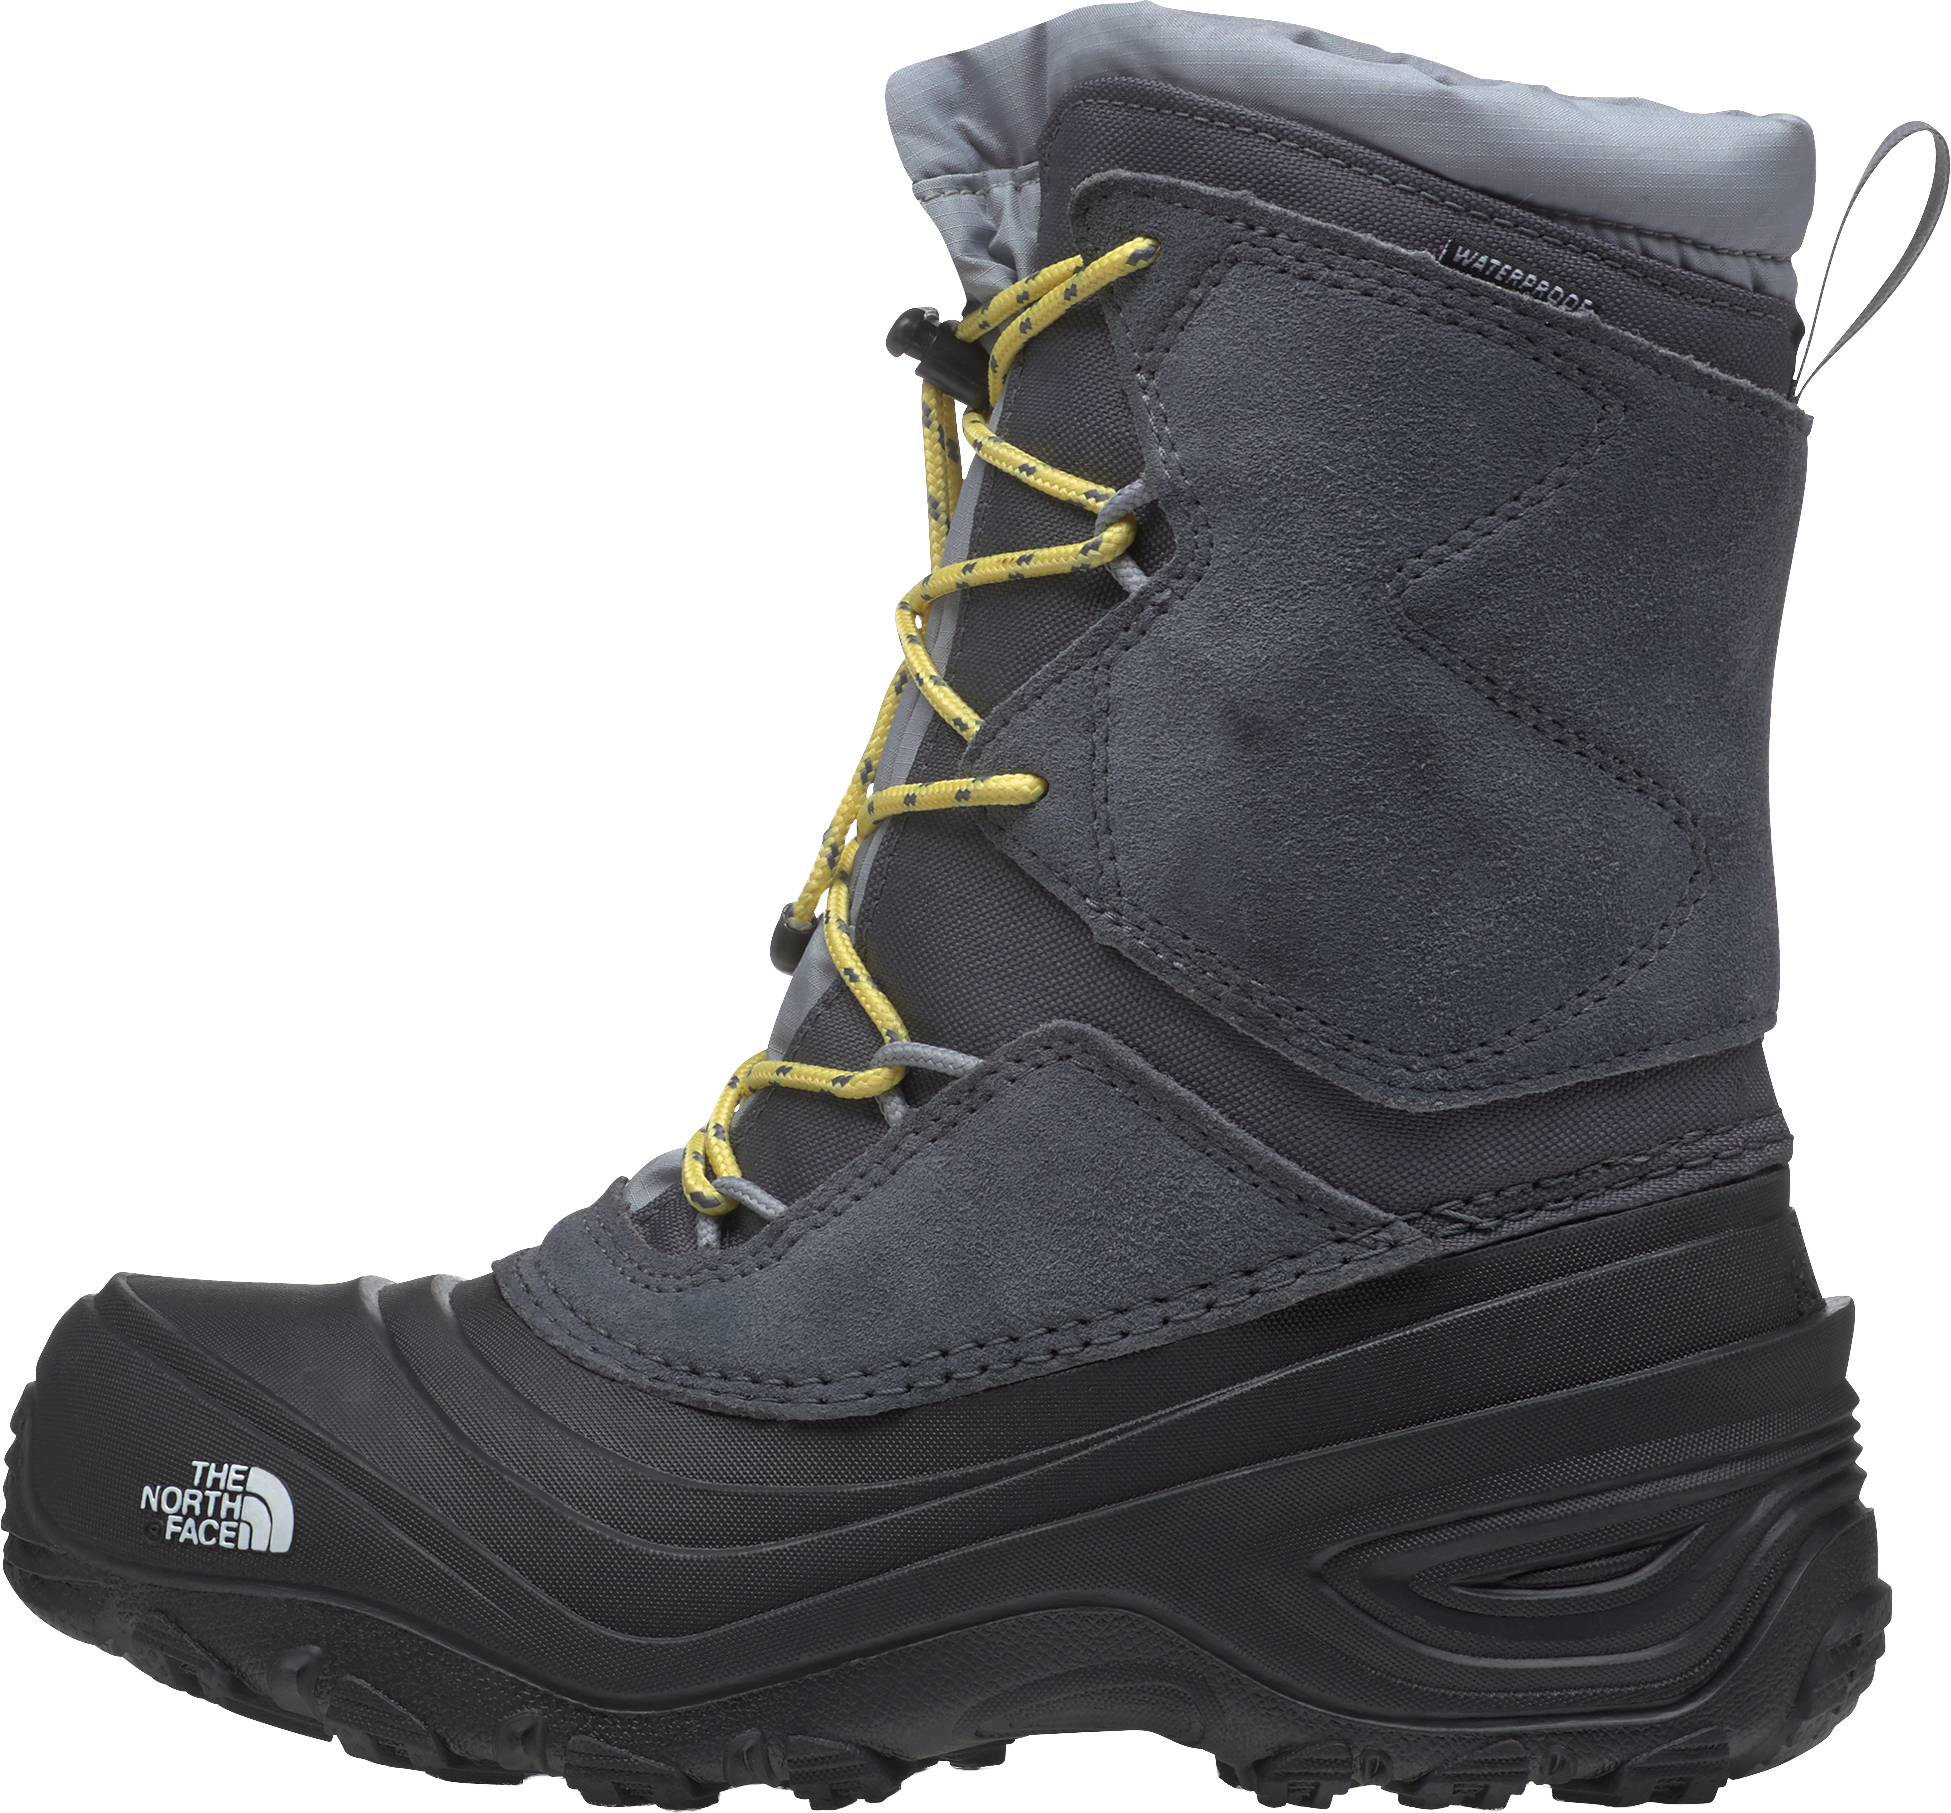 Merrell Moab 3 Thermo Mid Waterproof Winter Boots - Men's | MEC